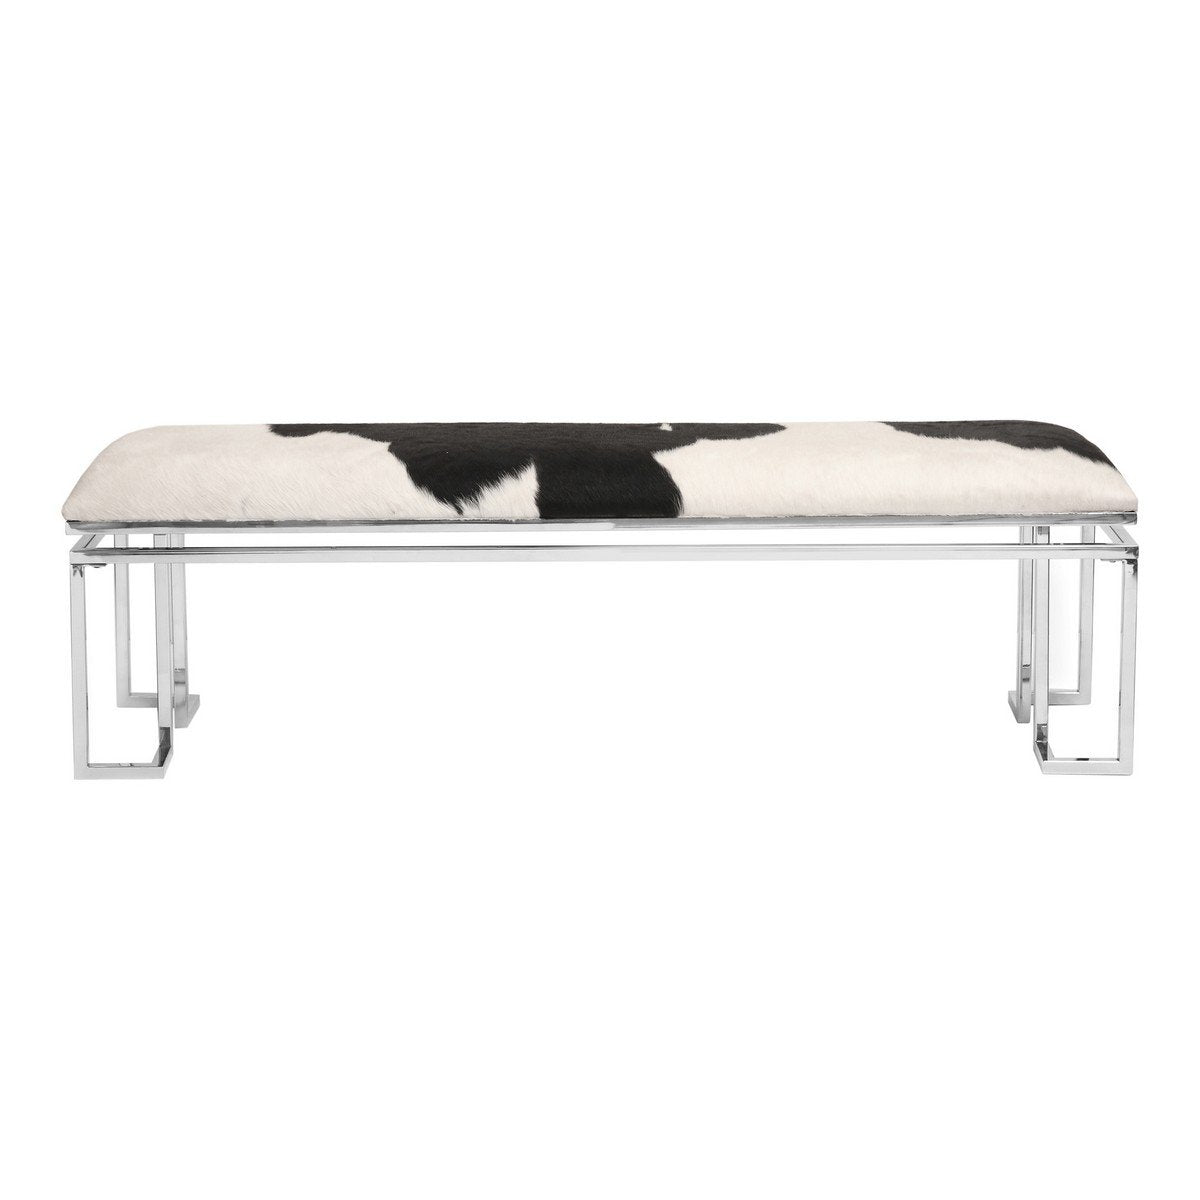 Moe's Home Collection Appa Bench - OT-1006-30 - Moe's Home Collection - Benches - Minimal And Modern - 1